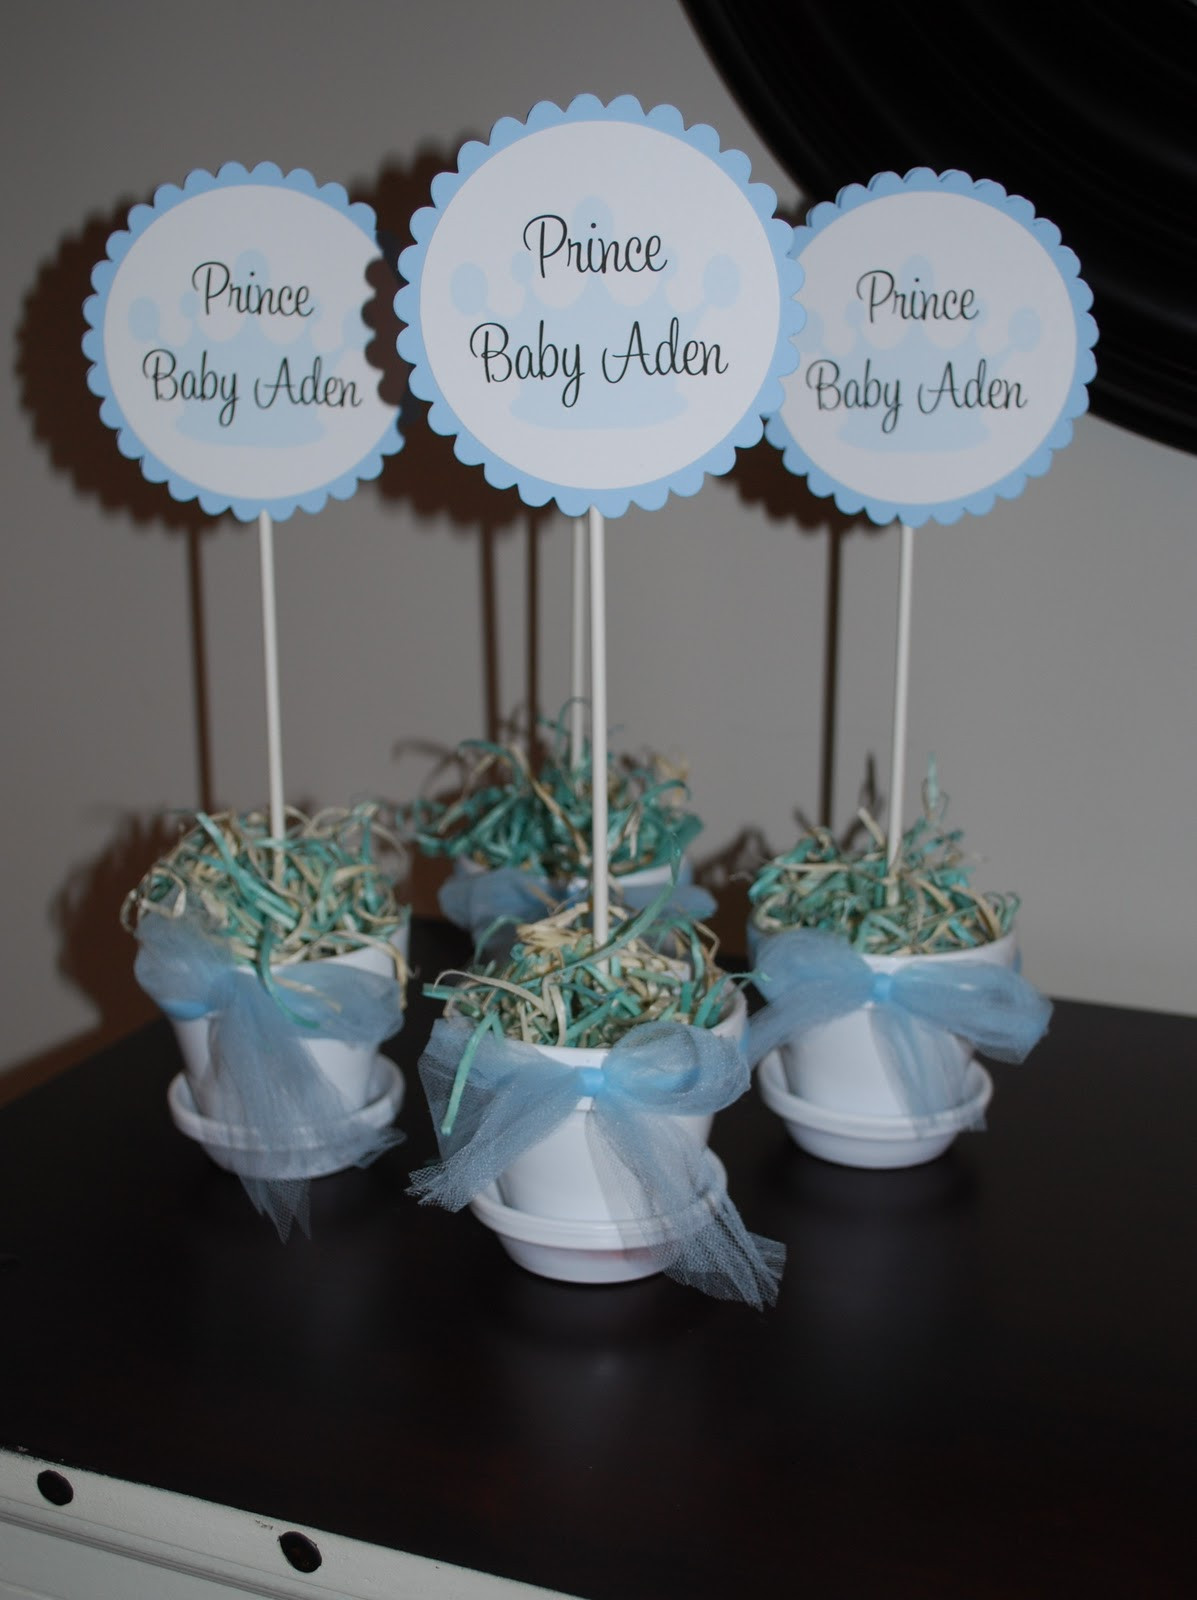 DIY Baby Shower Centerpieces For Boy
 Sweet P Parties Prince Baby Shower